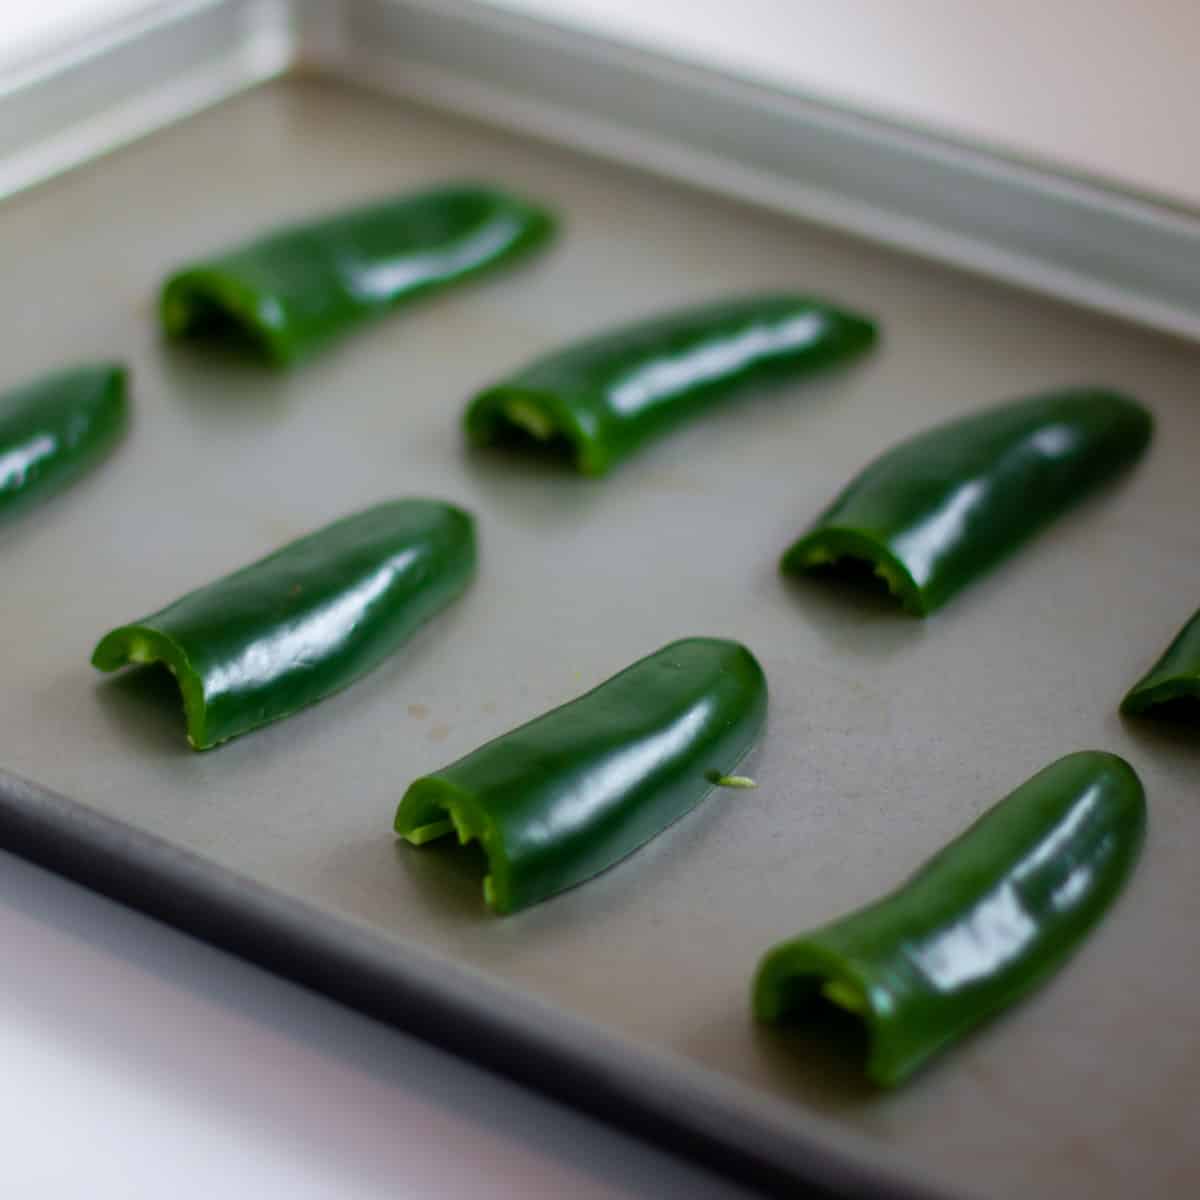 Raw jalapeno peppers on a baking sheet.